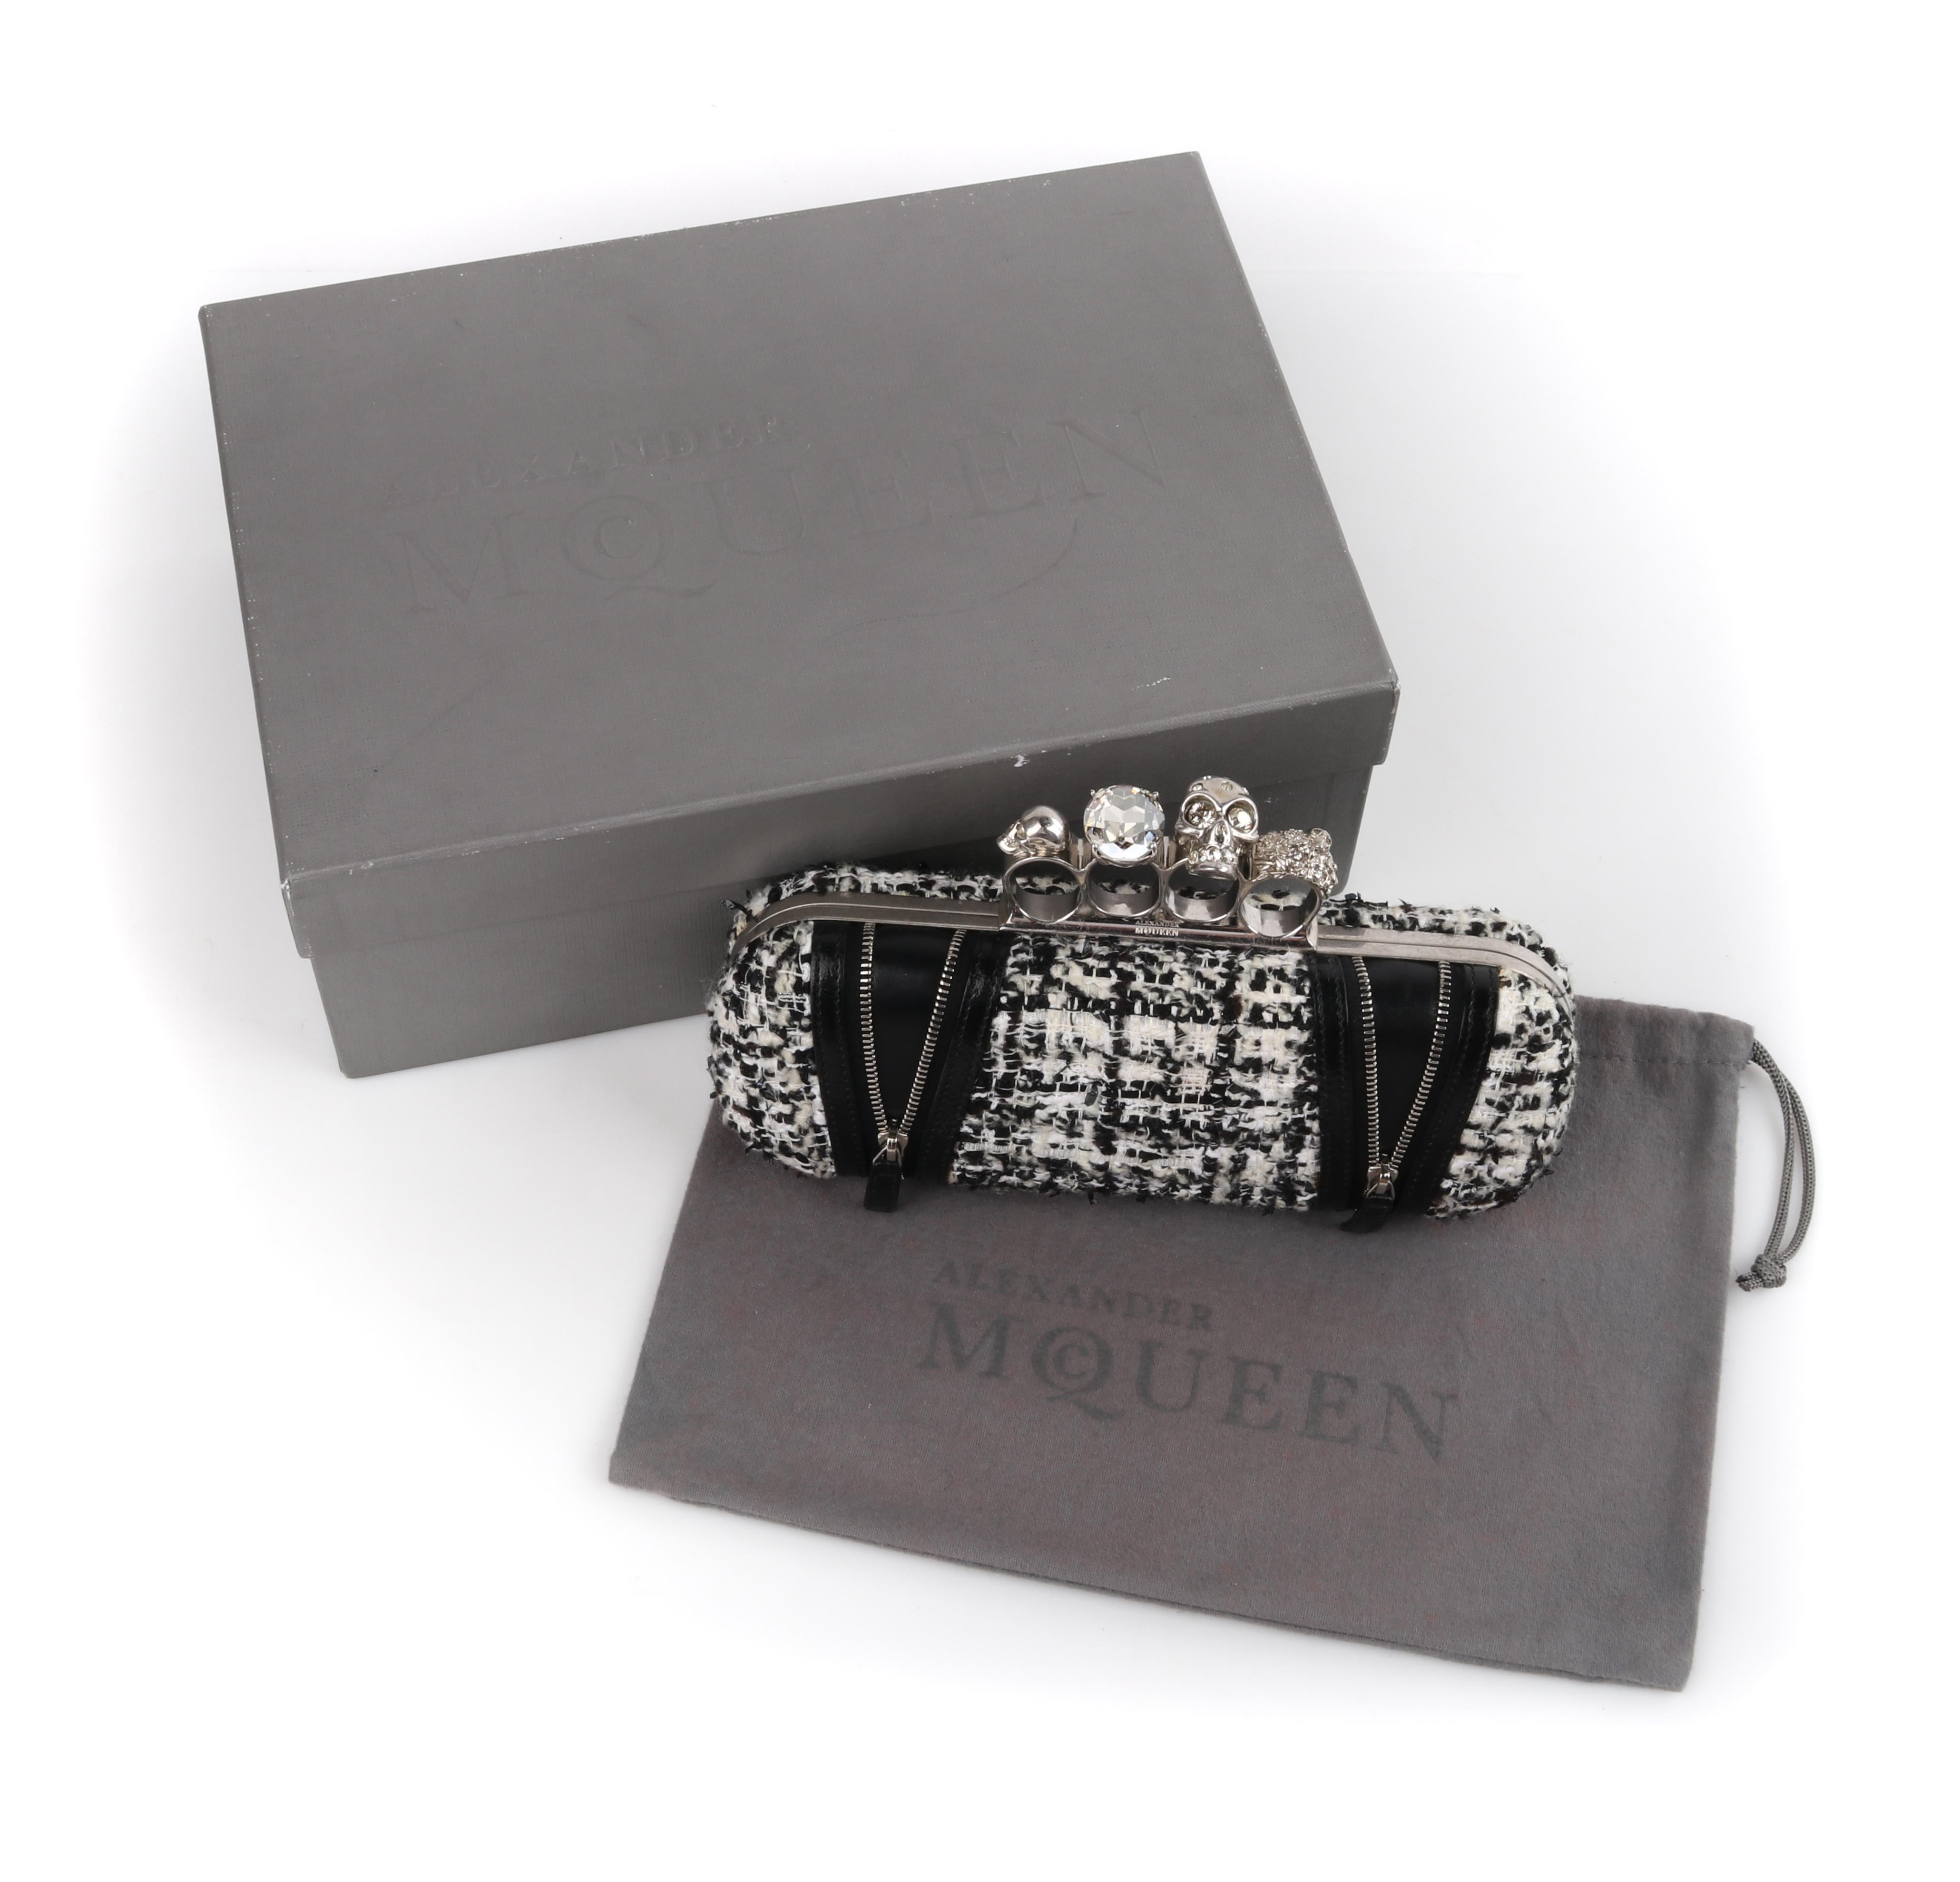 knuckle duster clutch bag